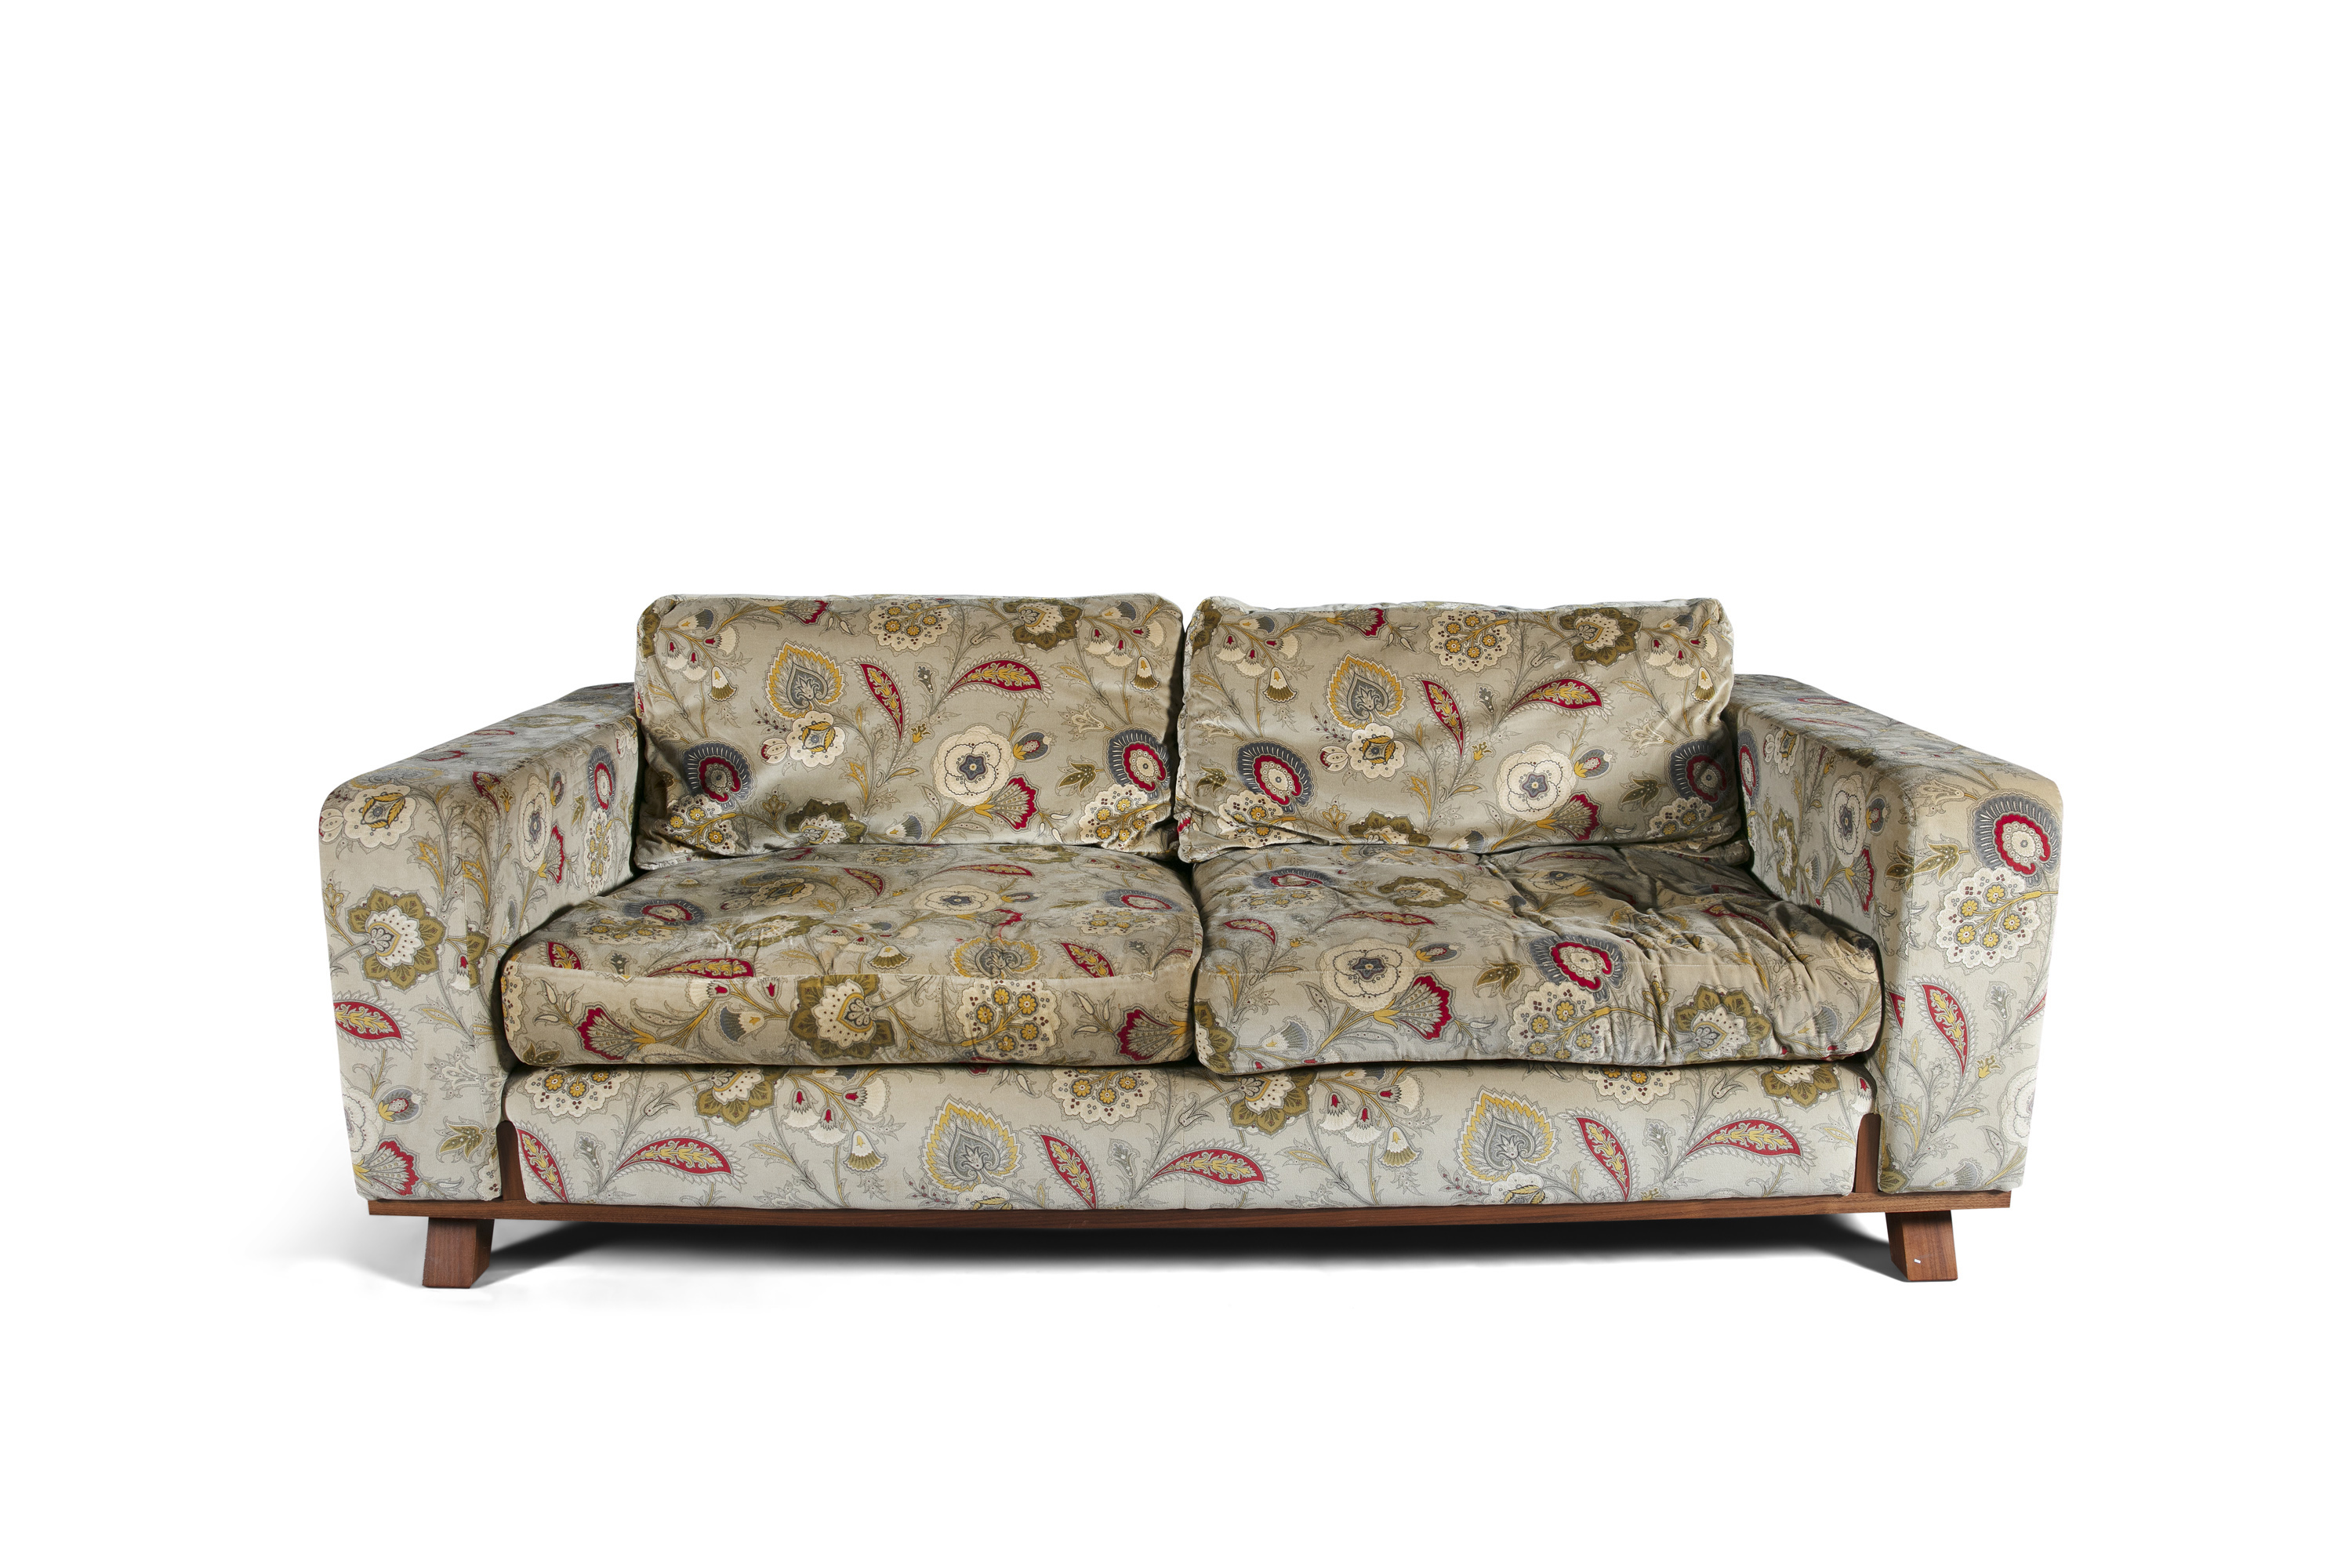 A TWO-SEATER FLORAL PATTERNED COUCH BY LINLEY, upholstered in biscuit beige fabric with floral